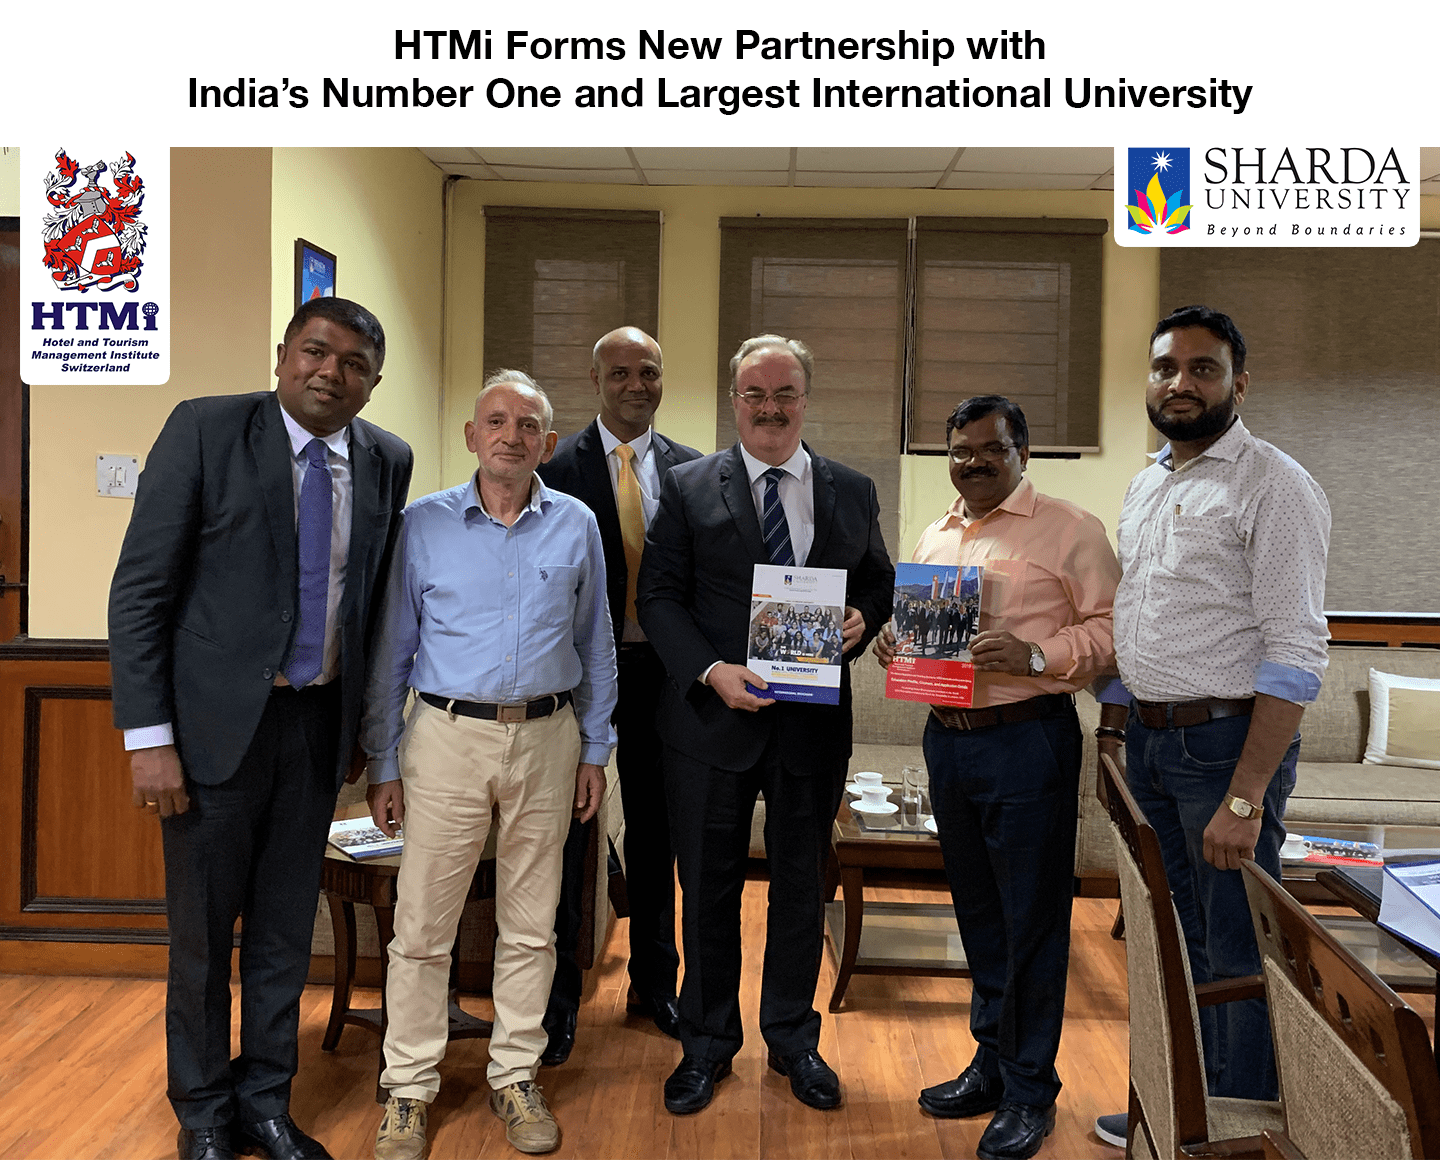 HTMi Forms New Partnership with India’s Number One and Largest International University